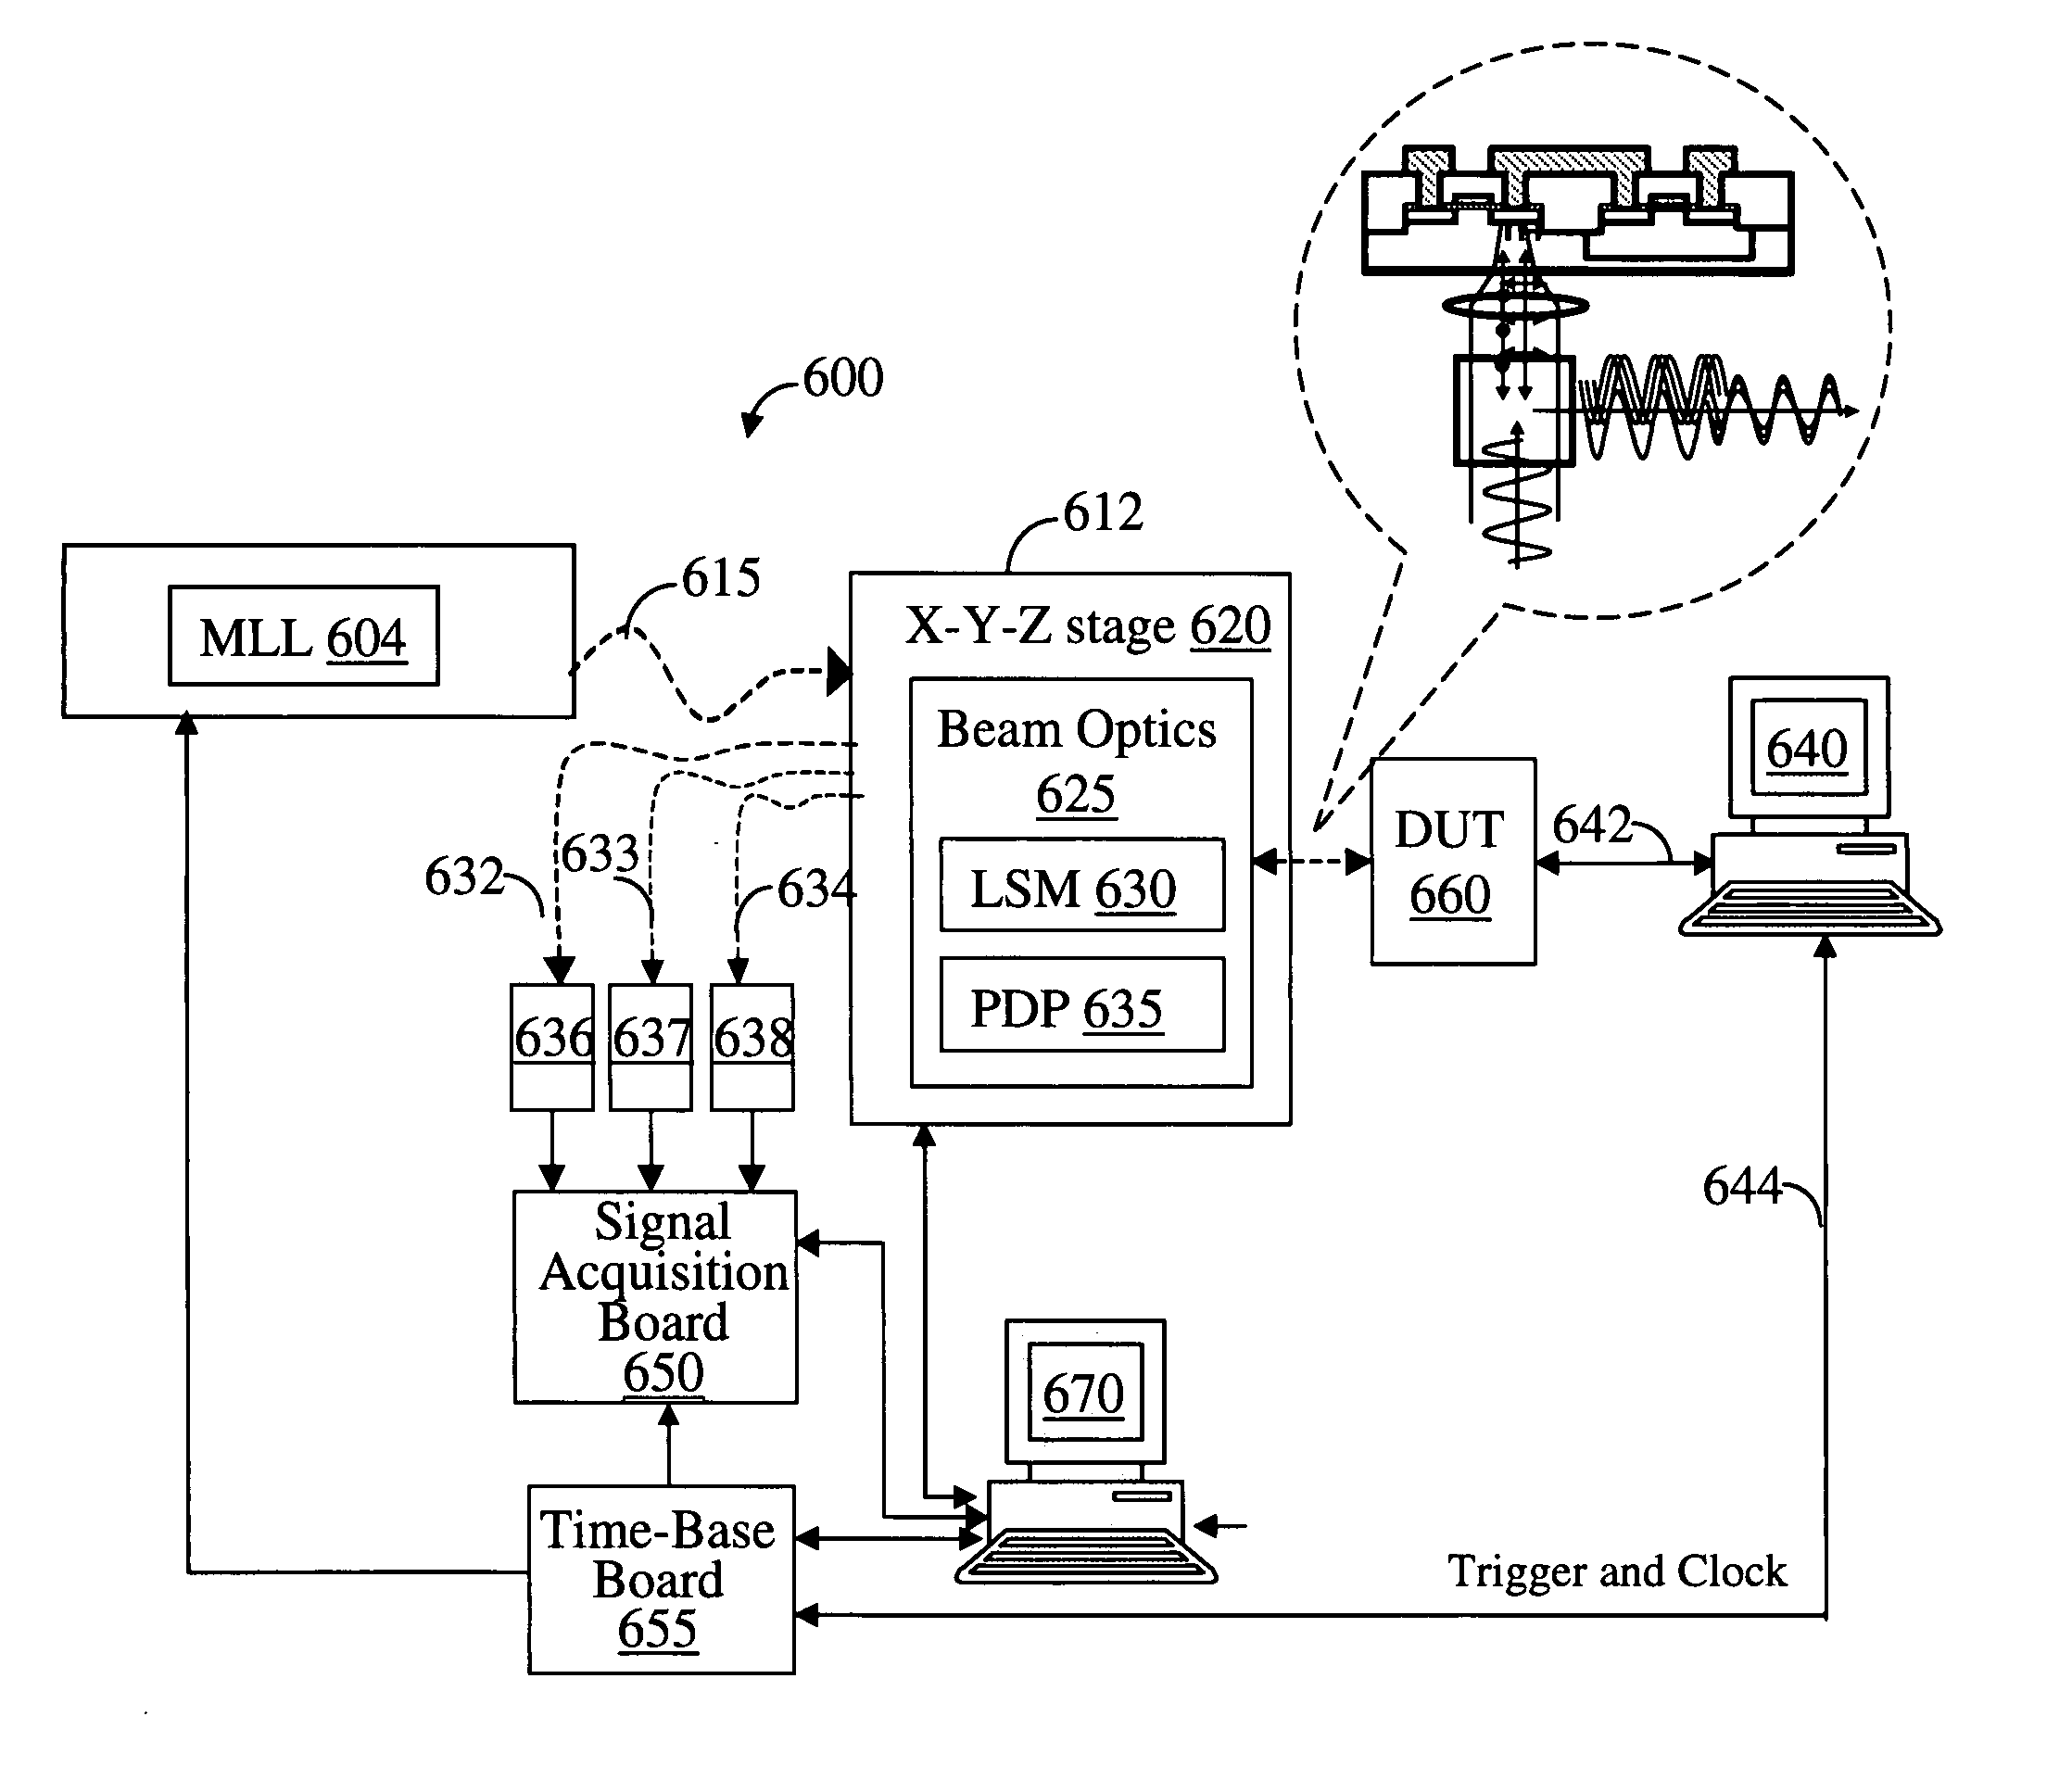 Laser probing system for integrated circuits